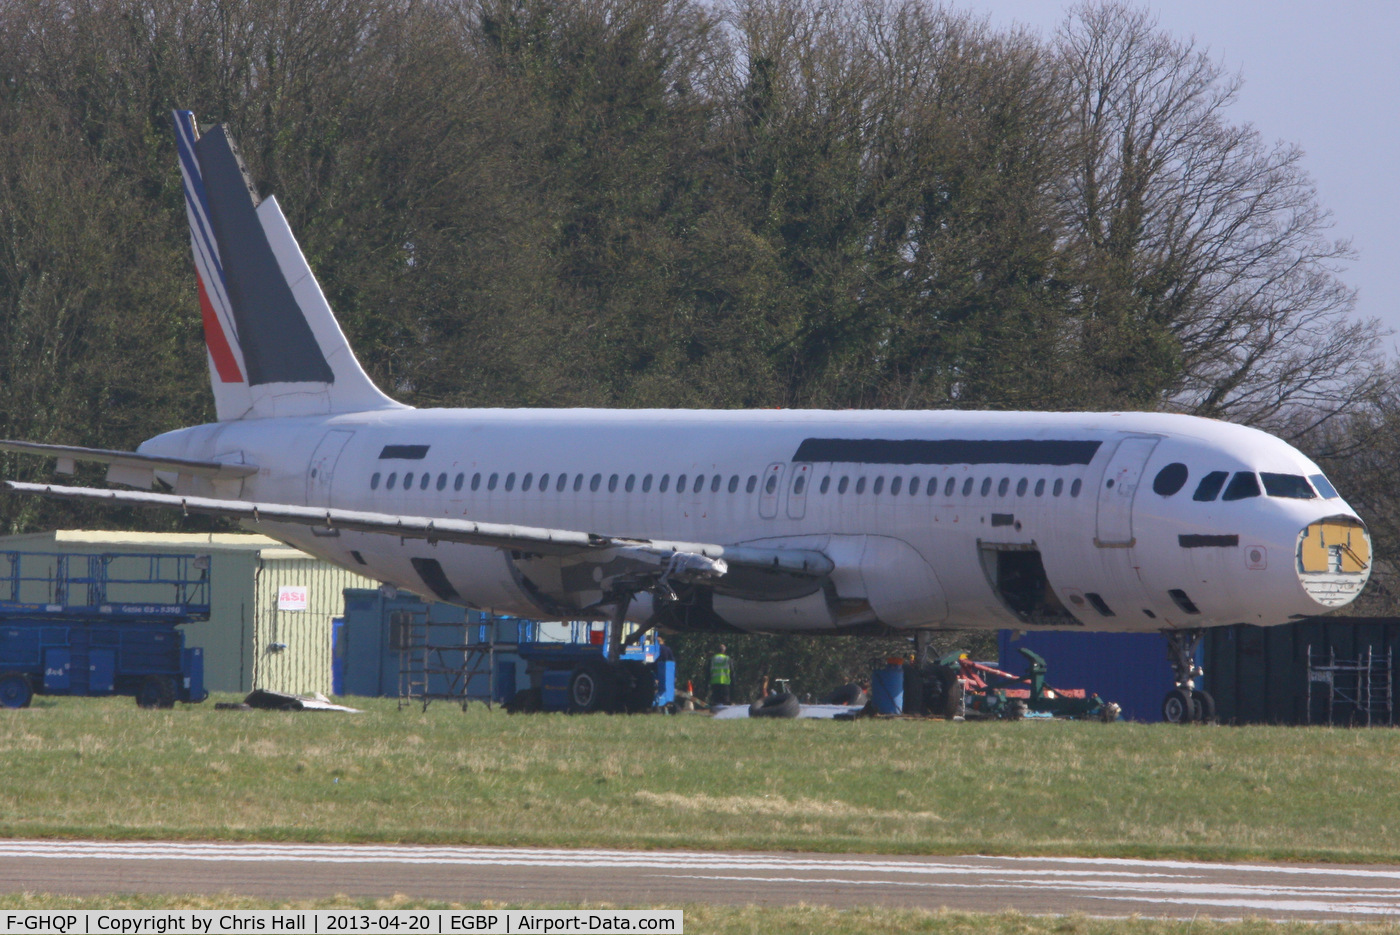 F-GHQP, 1992 Airbus A320-211 C/N 337, now in the scrapping area at Kemble